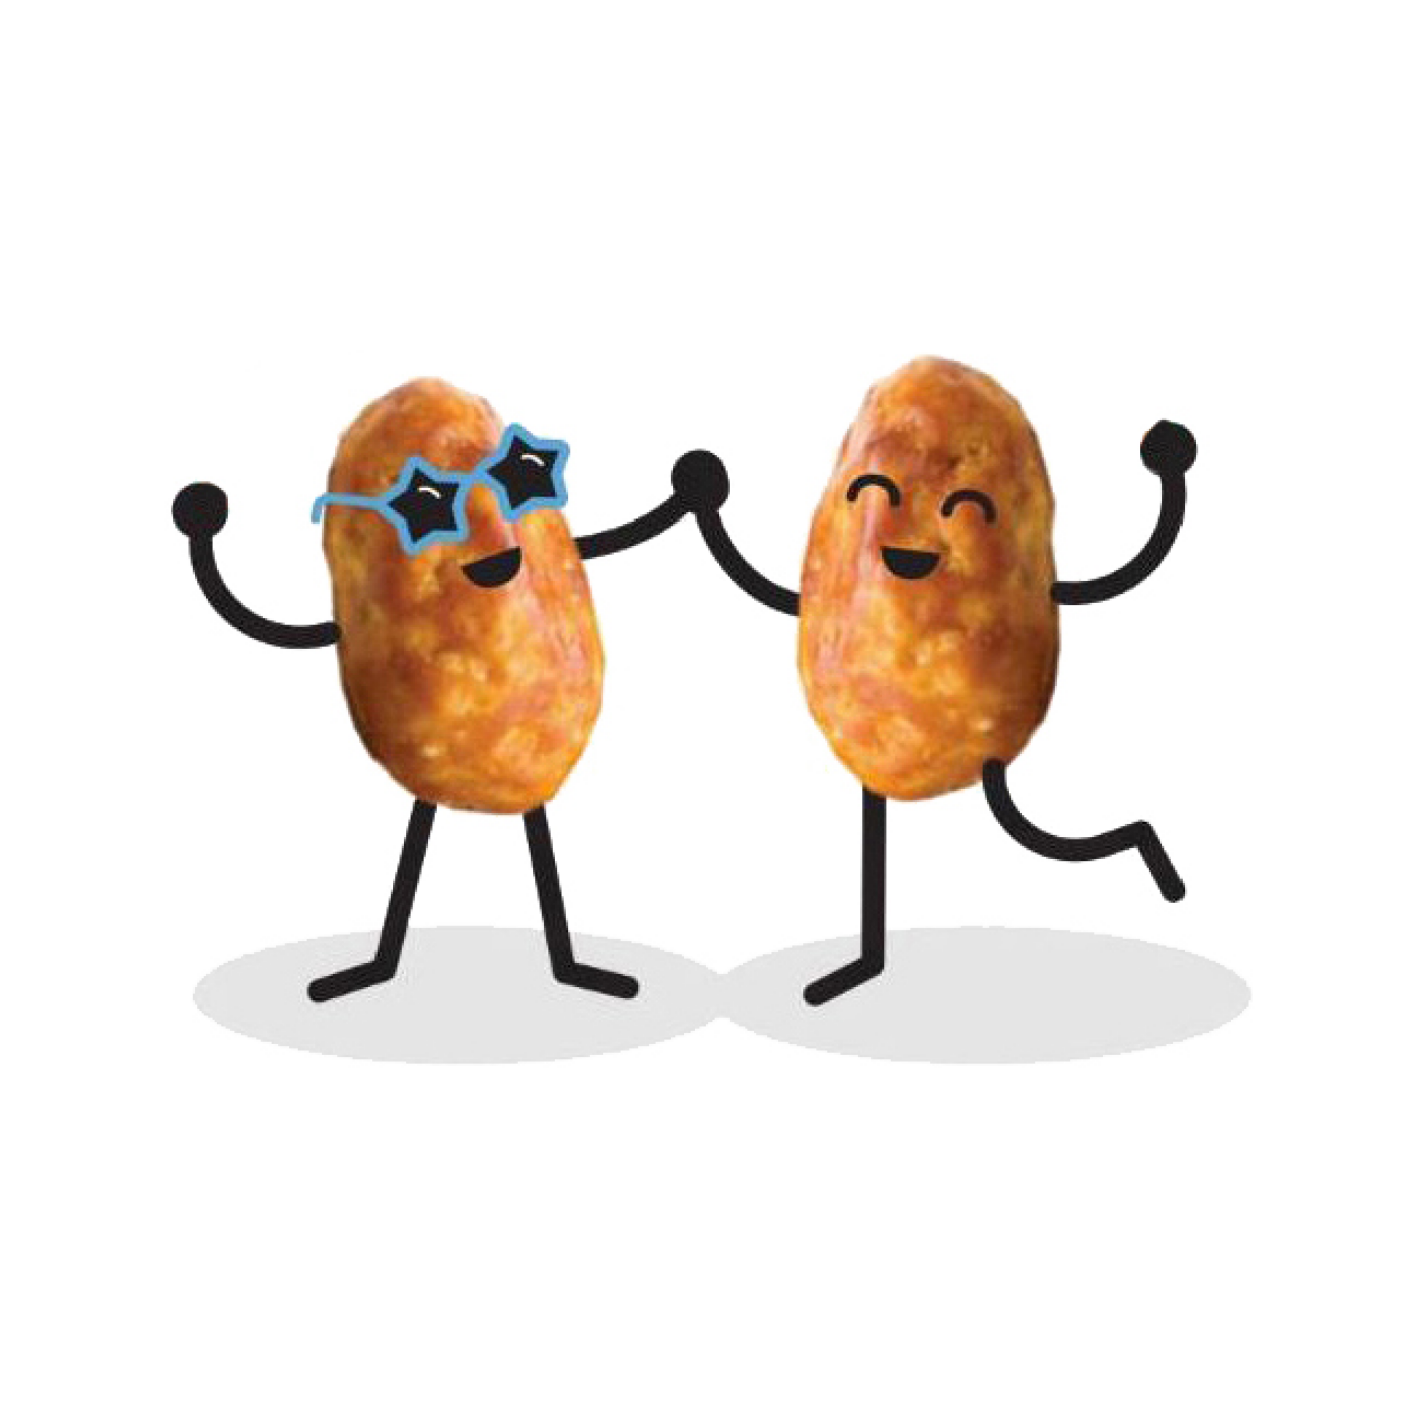 Two pieces of chips happily dancing together.